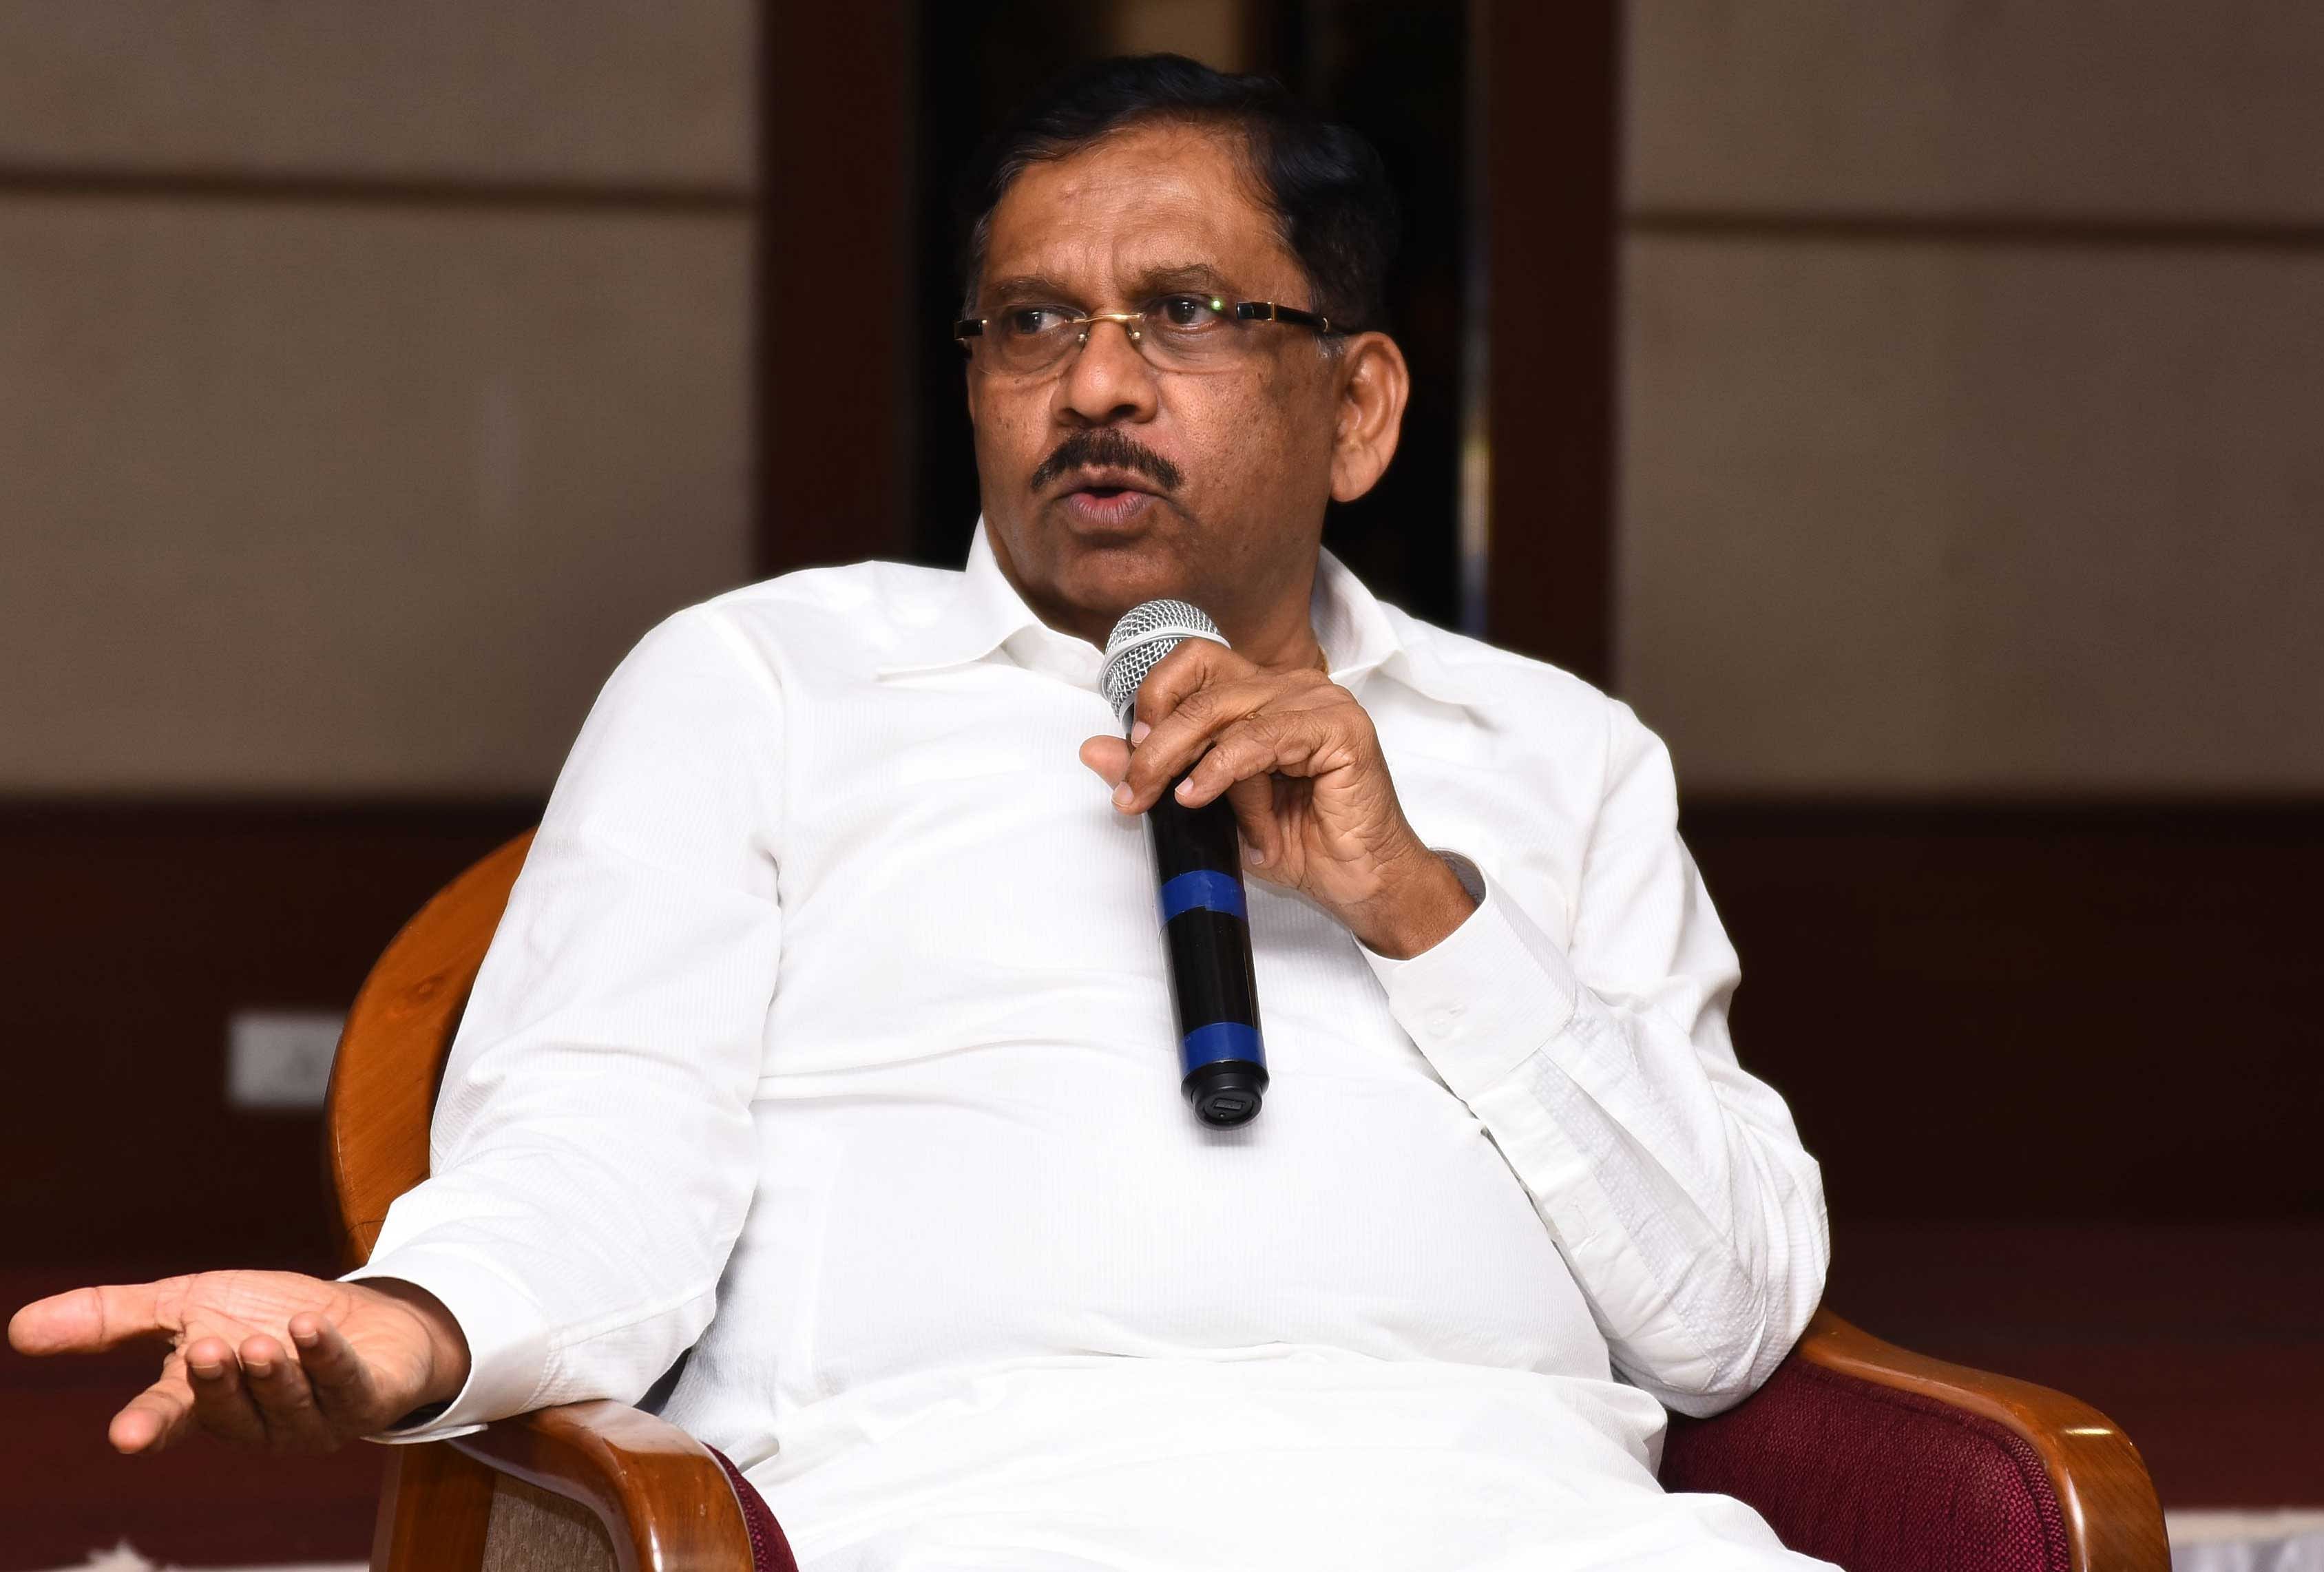 “There is a proposal to create two deputy chief ministers post. But no decision has been taken so far. Congress president Rahul Gandhi will take a call in this regard,” KPCC president G Parameshwara told reporters after emerging from a meeting of senior party leaders. DH file photo